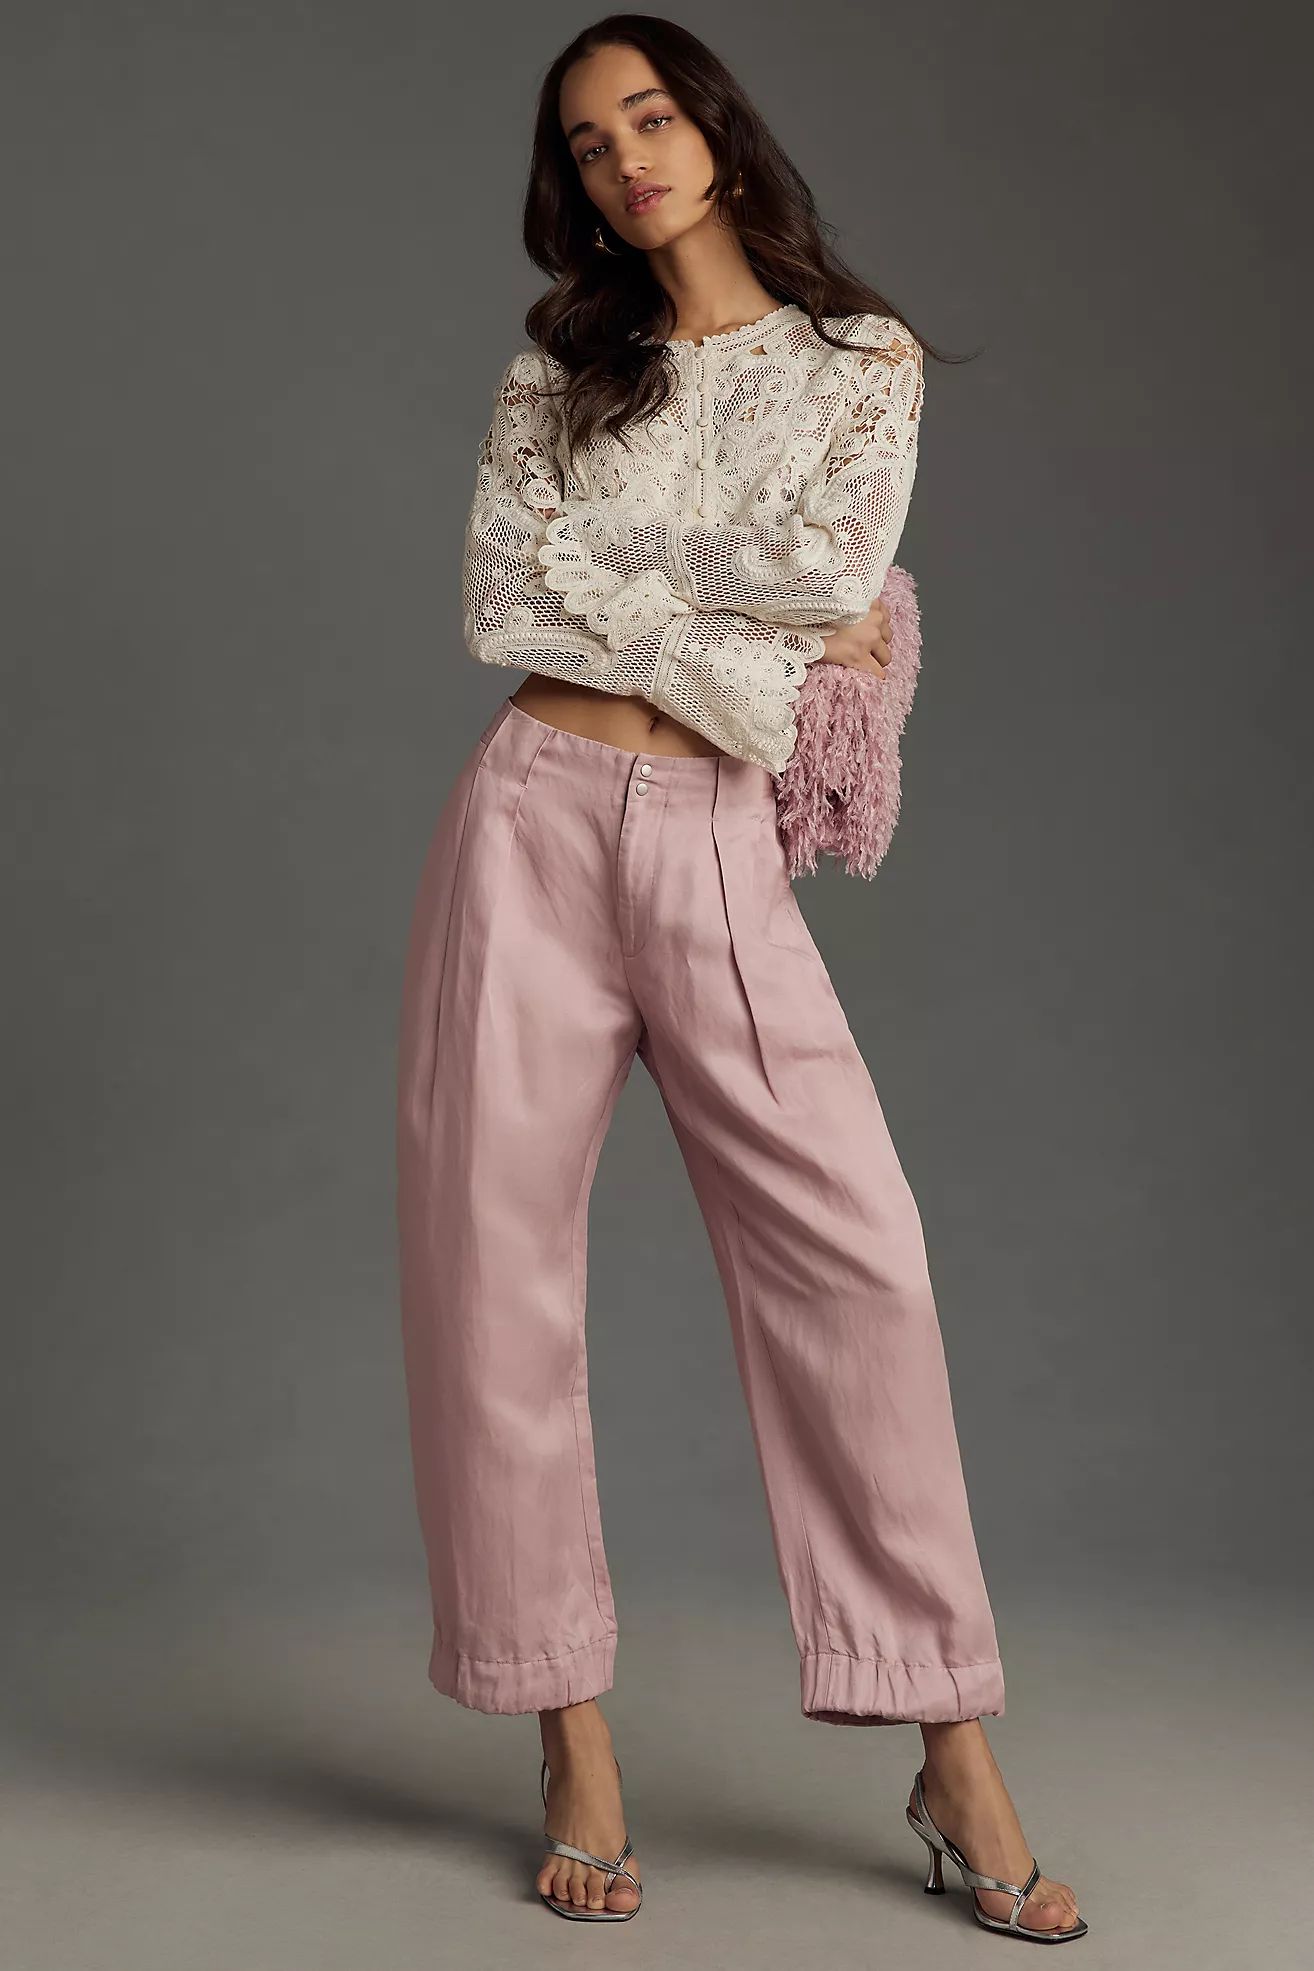 By Anthropologie Cinched Hem Trousers | Anthropologie (US)